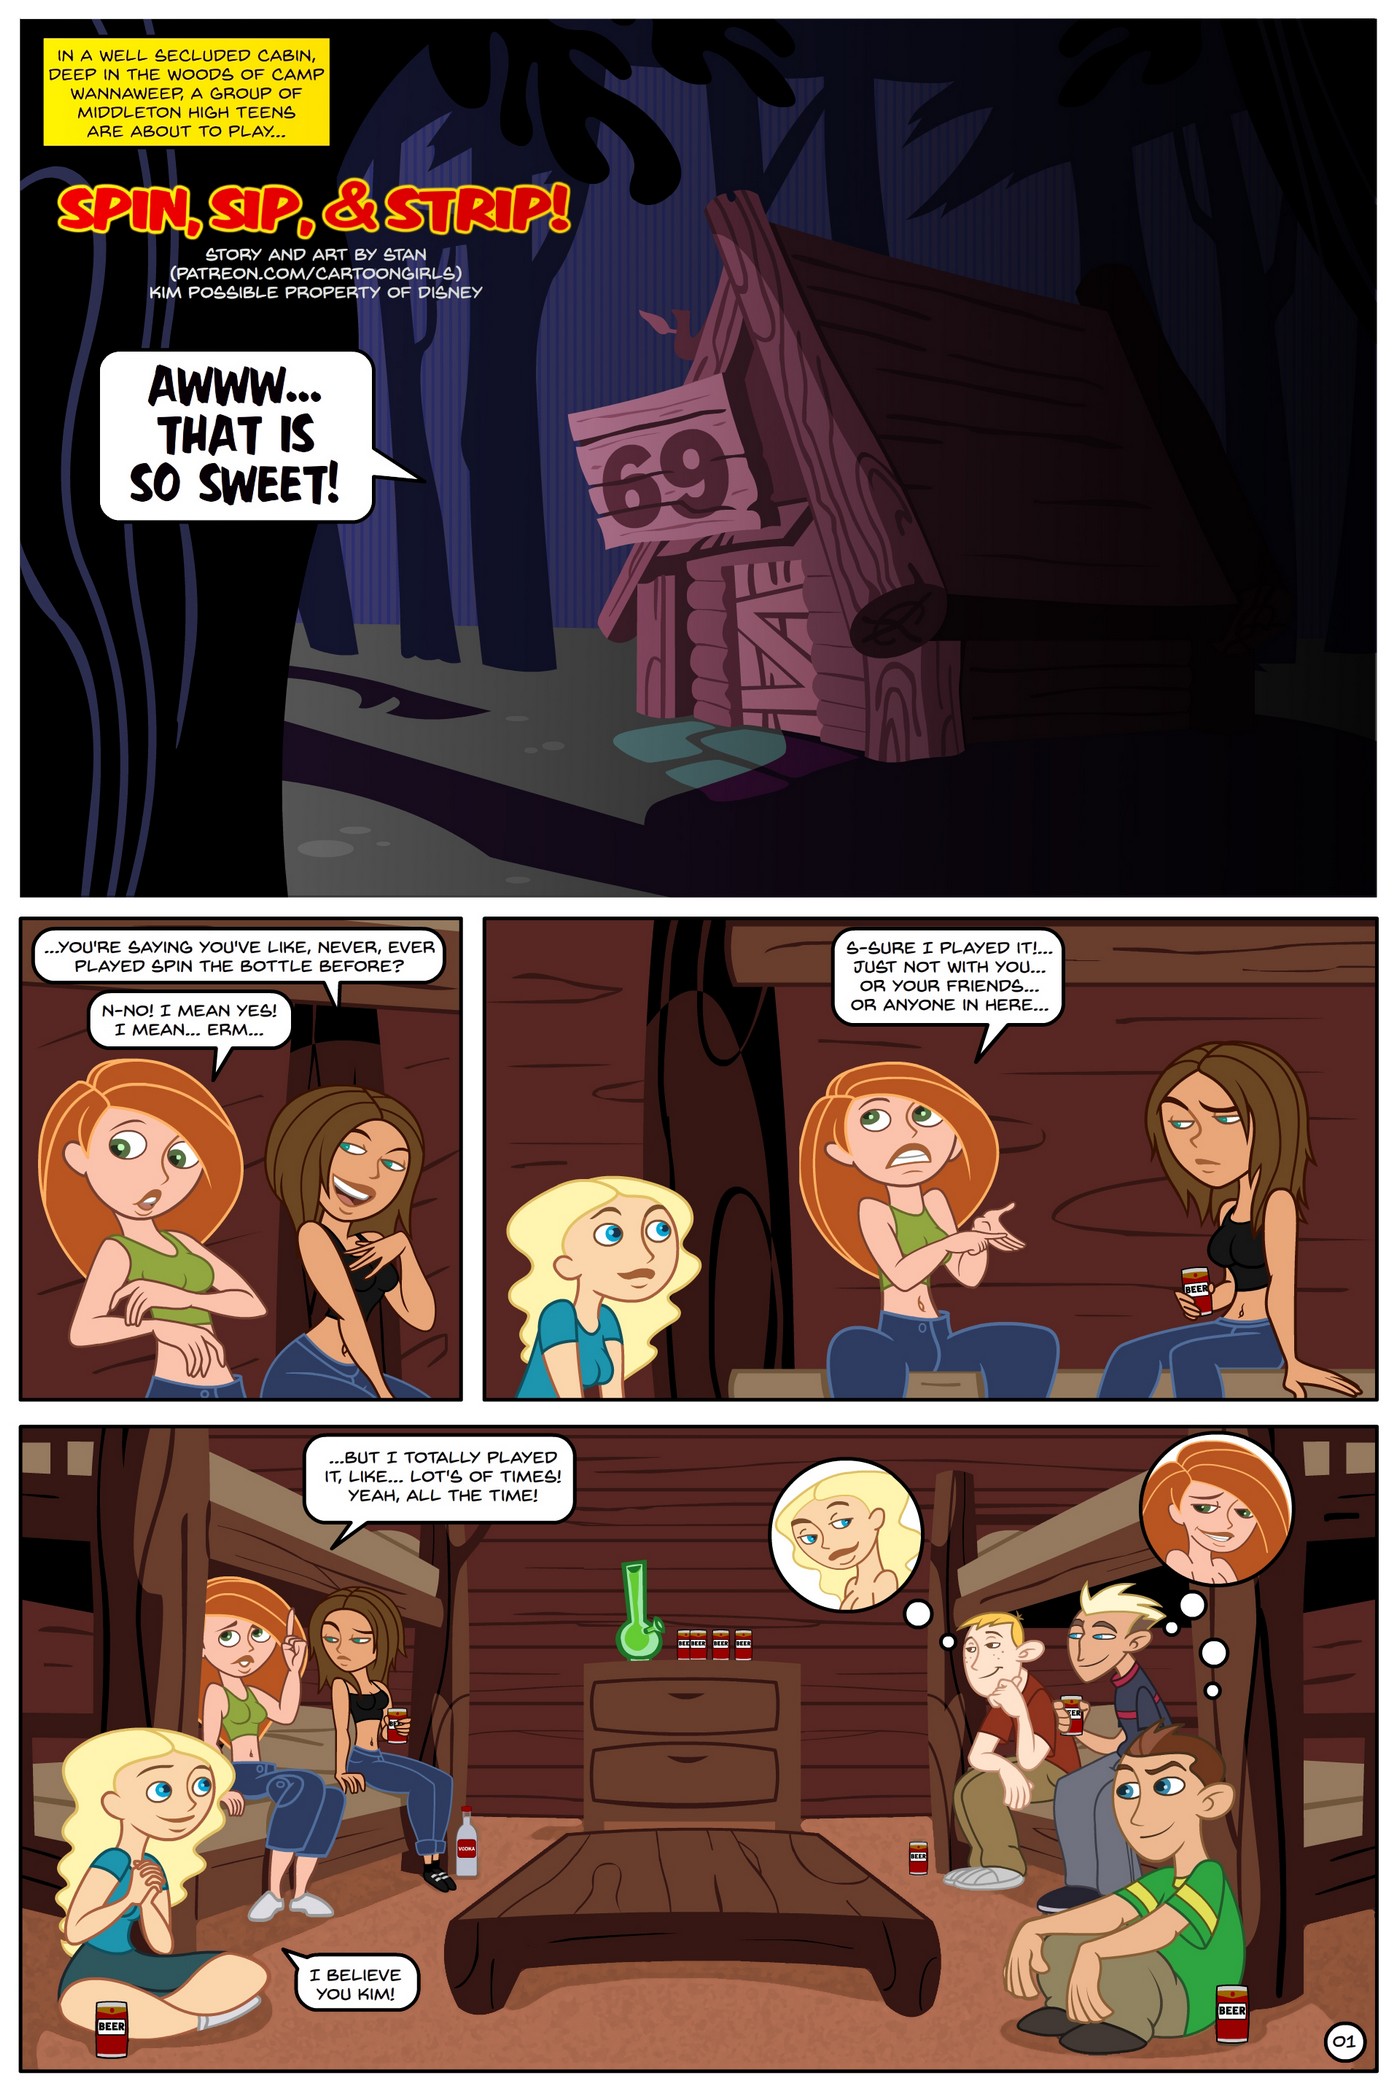 Kim Possible Spin, Sip & Strip! 02